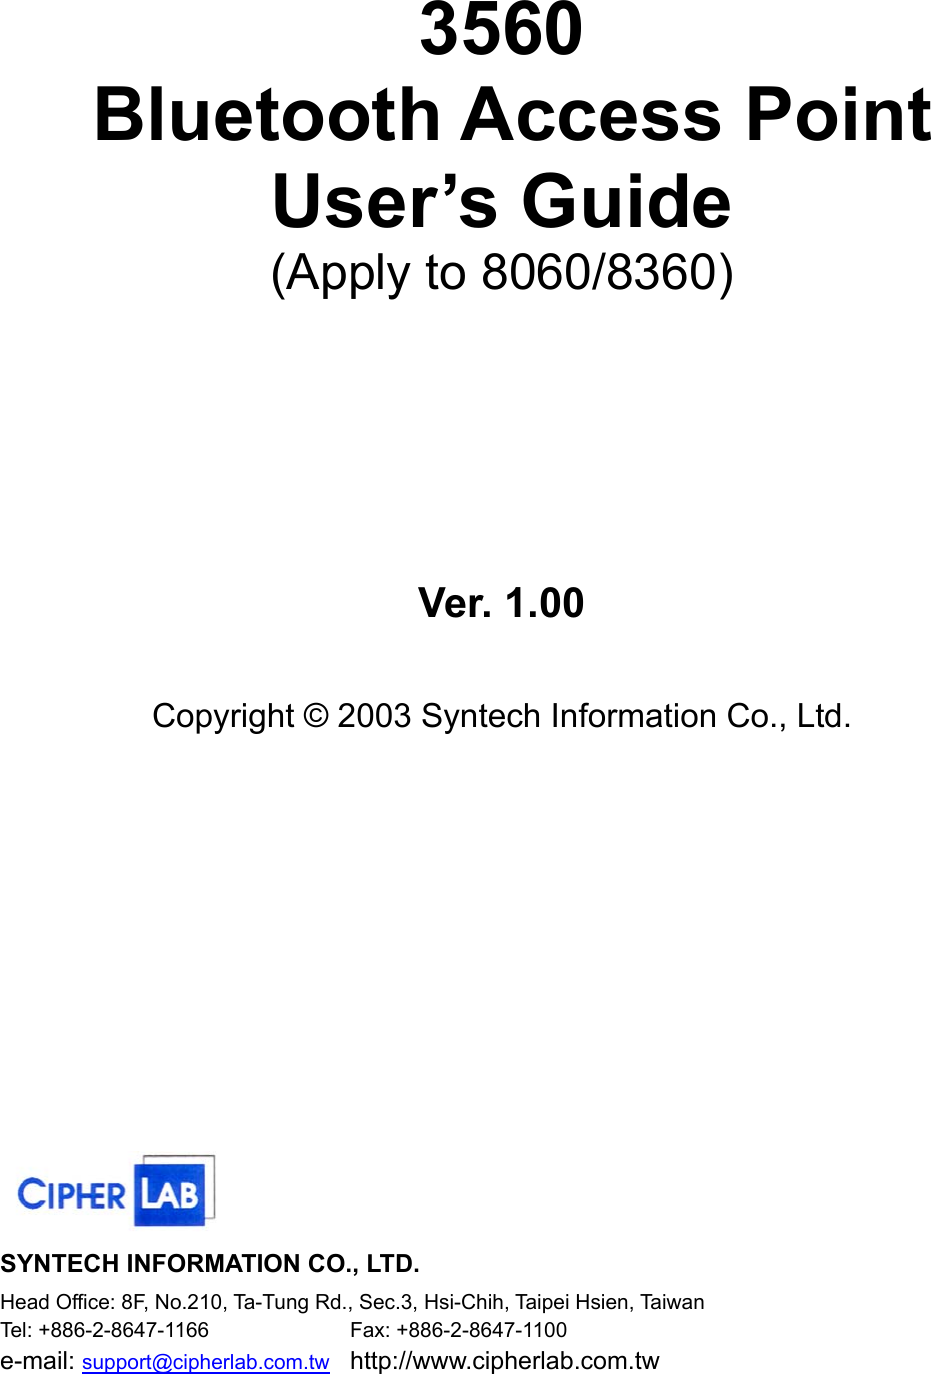  3560  Bluetooth Access Point User’s Guide (Apply to 8060/8360)     Ver. 1.00  Copyright © 2003 Syntech Information Co., Ltd.       SYNTECH INFORMATION CO., LTD. Head Office: 8F, No.210, Ta-Tung Rd., Sec.3, Hsi-Chih, Taipei Hsien, Taiwan Tel: +886-2-8647-1166   Fax: +886-2-8647-1100 e-mail: support@cipherlab.com.tw http://www.cipherlab.com.tw 